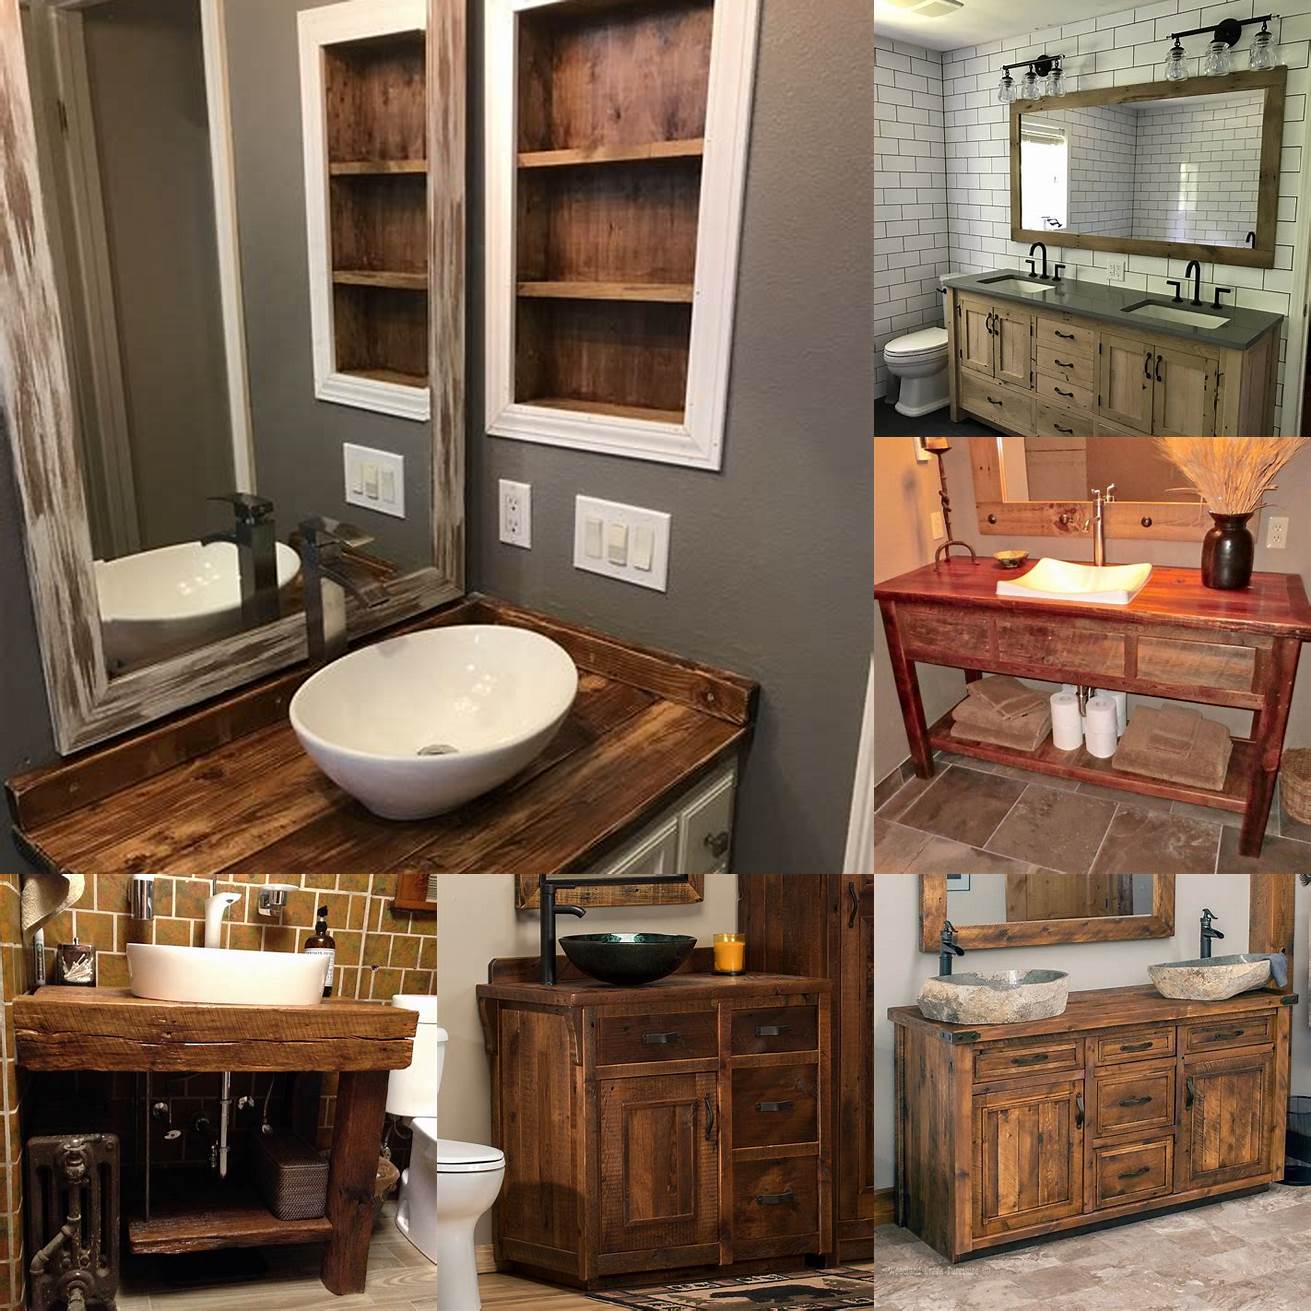 1 Rustic wooden vanity with a stone countertop